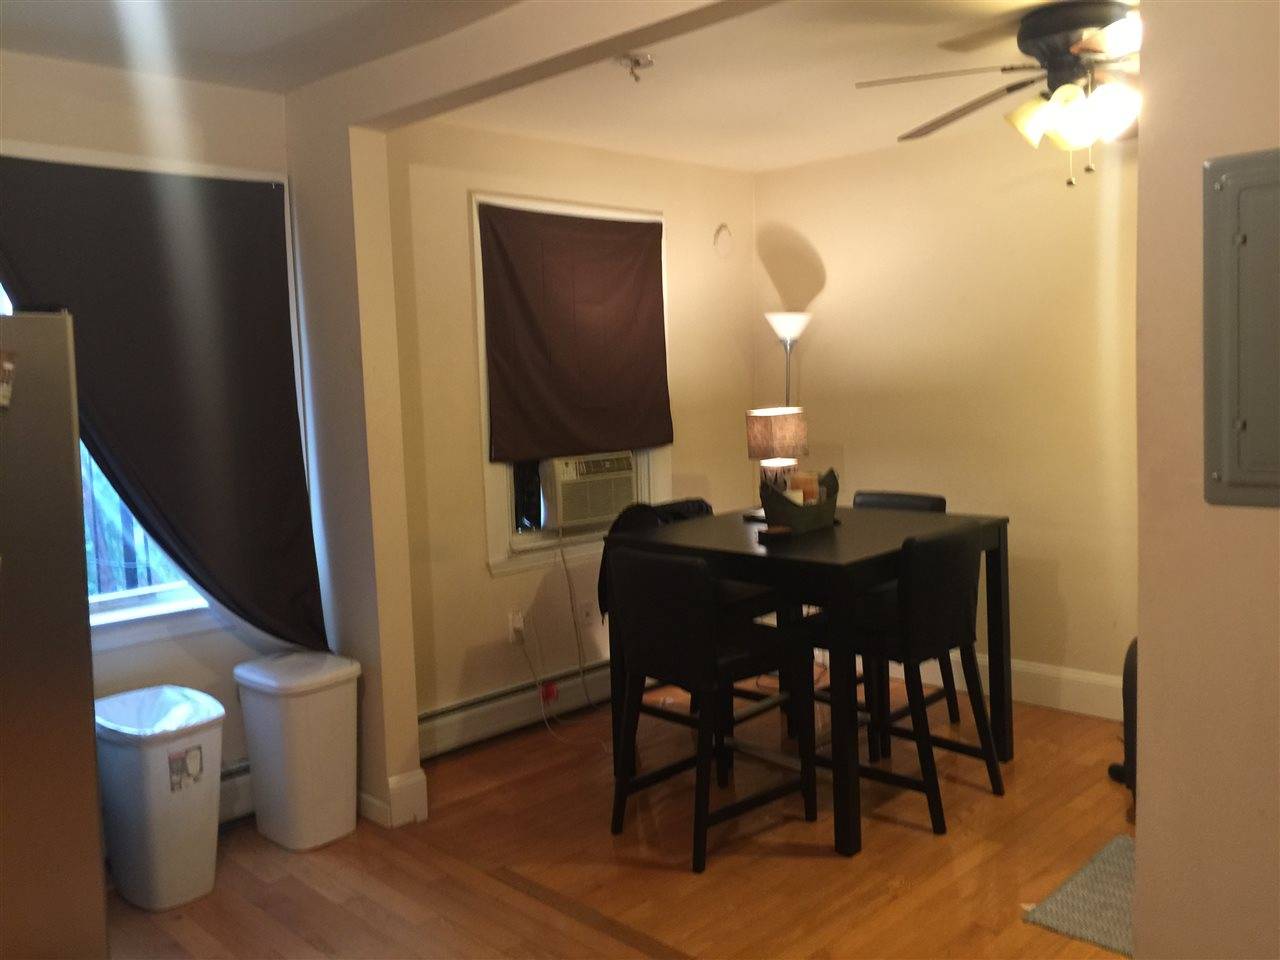 Cool two bedroom unit for rent - 2 BR New Jersey